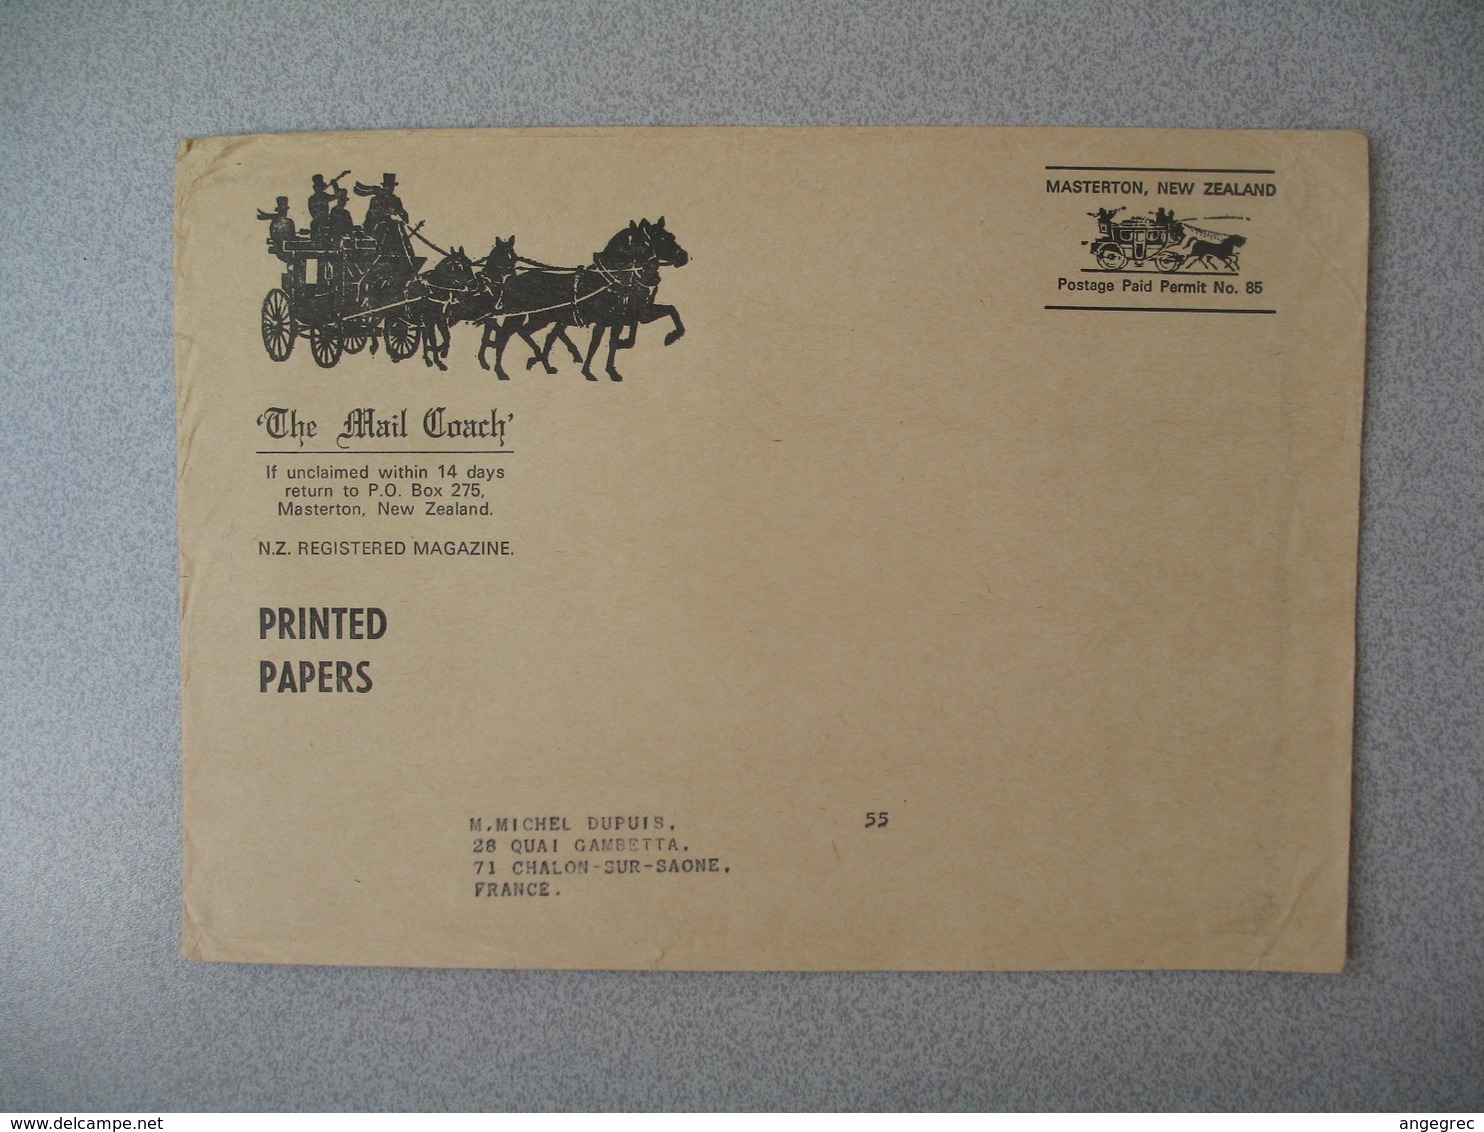 Nouvelle-Zélande The Mail Coach Masterton Registered Magazine  Lettre Postage Paid Permit N° 85 - New Zealand Cover - Covers & Documents